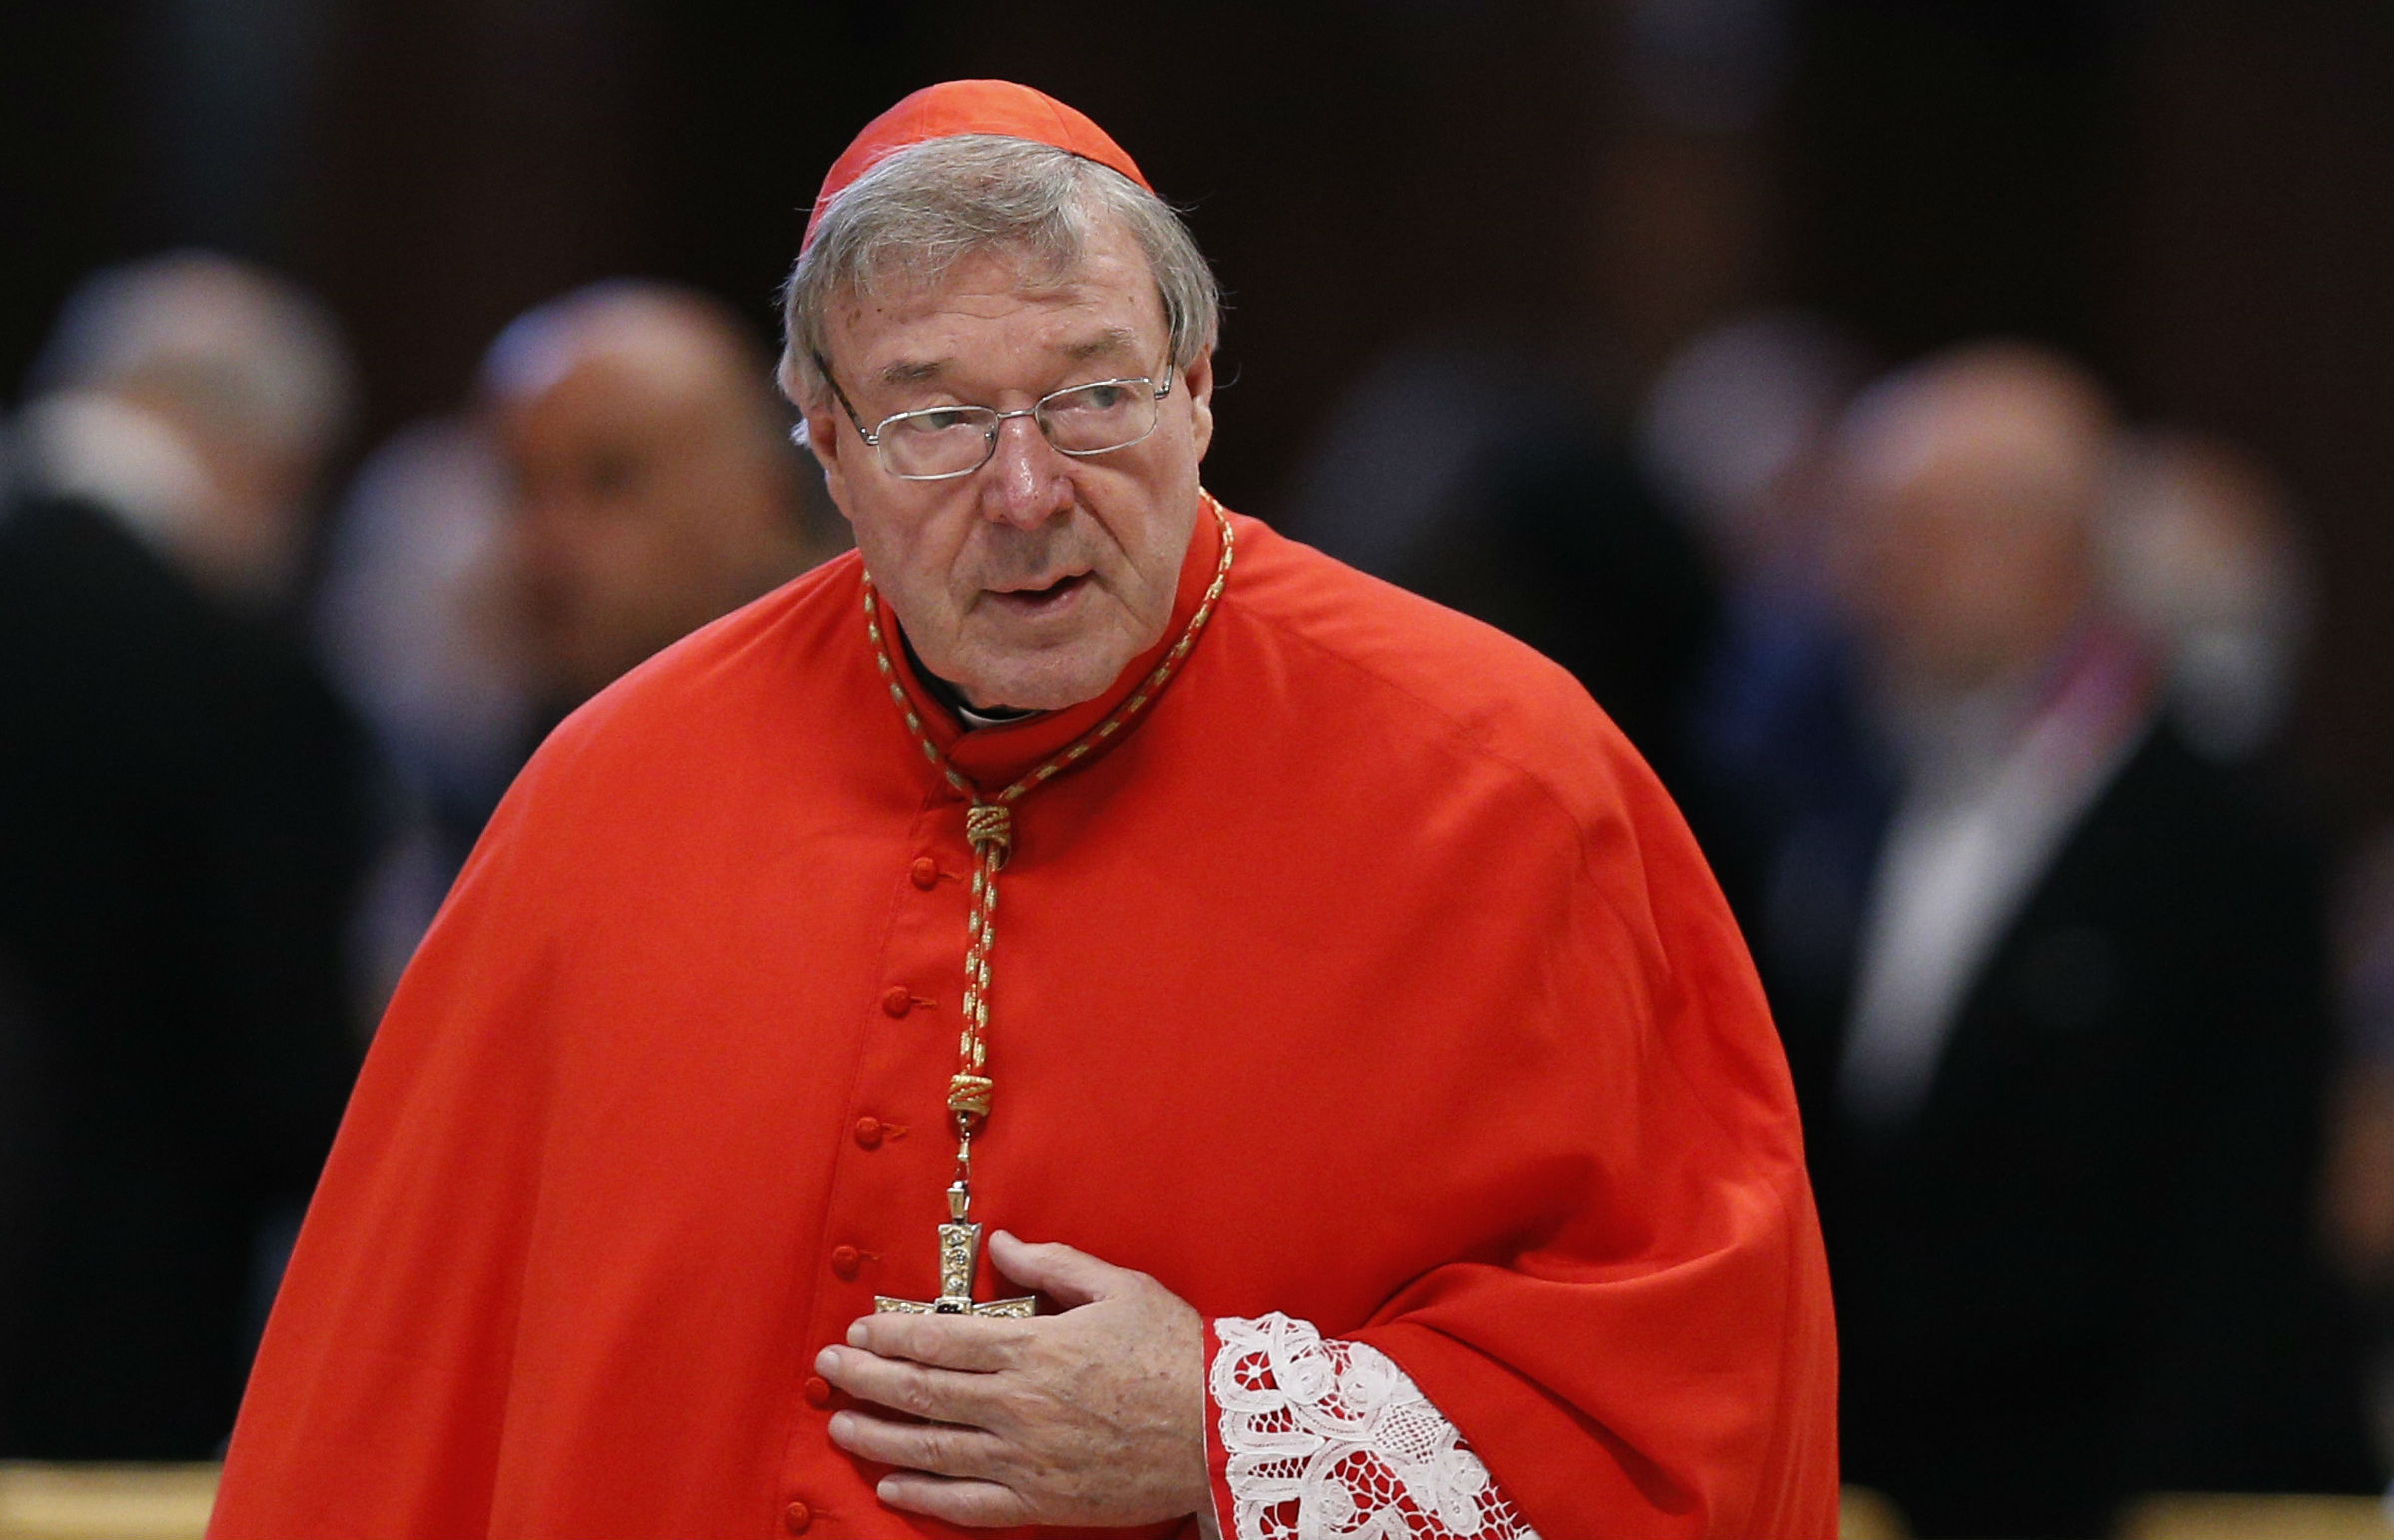 Supporters set up fund to pay Cardinal Pell's legal fees 